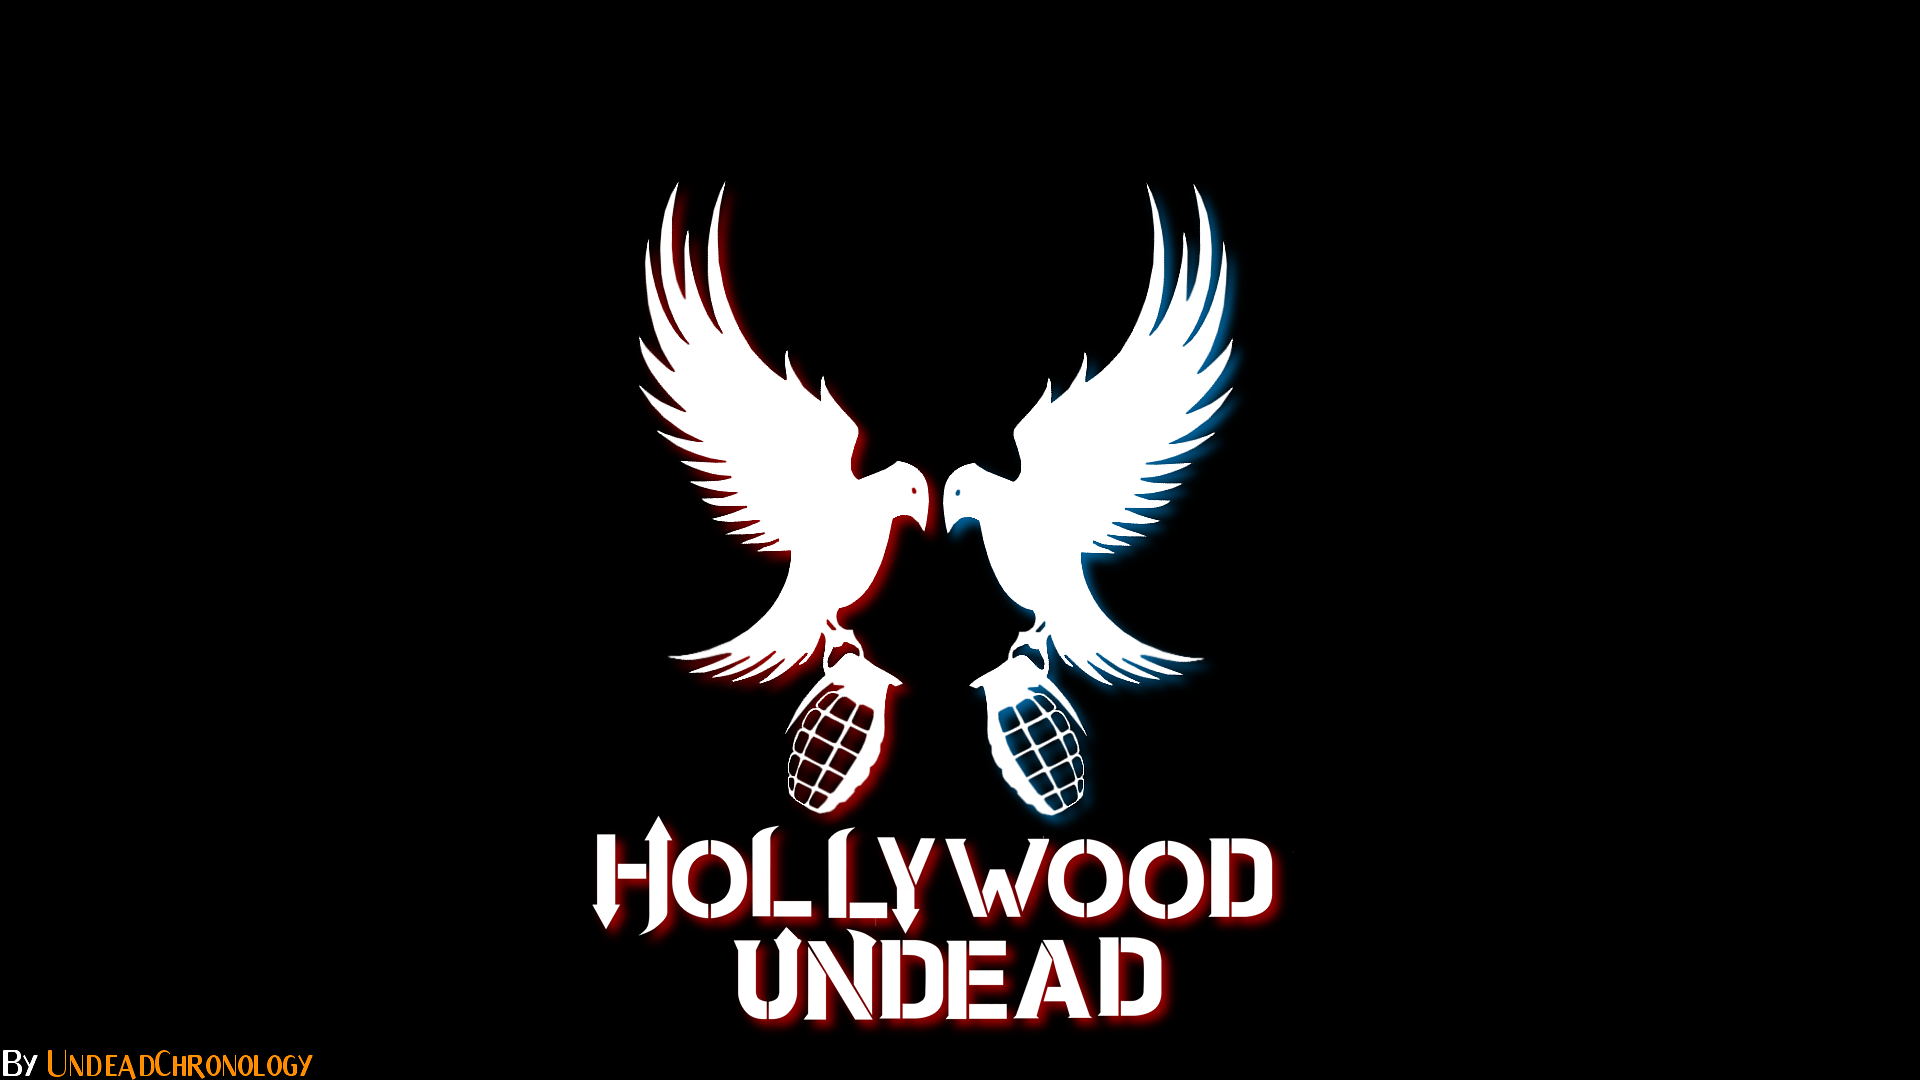  wallpaper other 2014 2015 dcfempx yup hollywood undead wallpaper it s